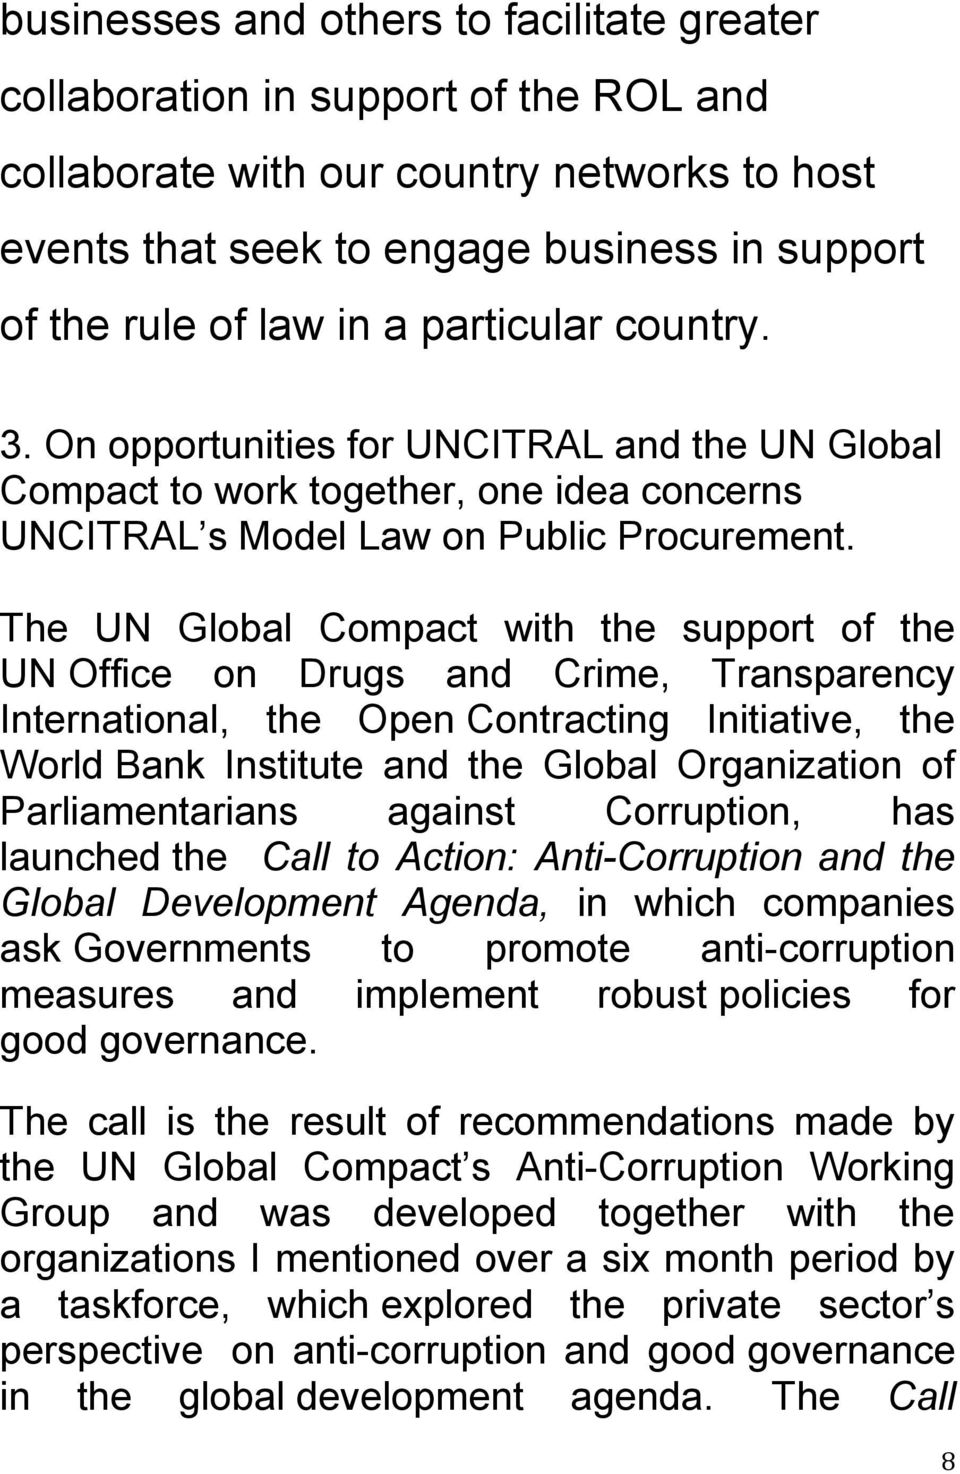 The UN Global Compact with the support of the UN Office on Drugs and Crime, Transparency International, the Open Contracting Initiative, the World Bank Institute and the Global Organization of